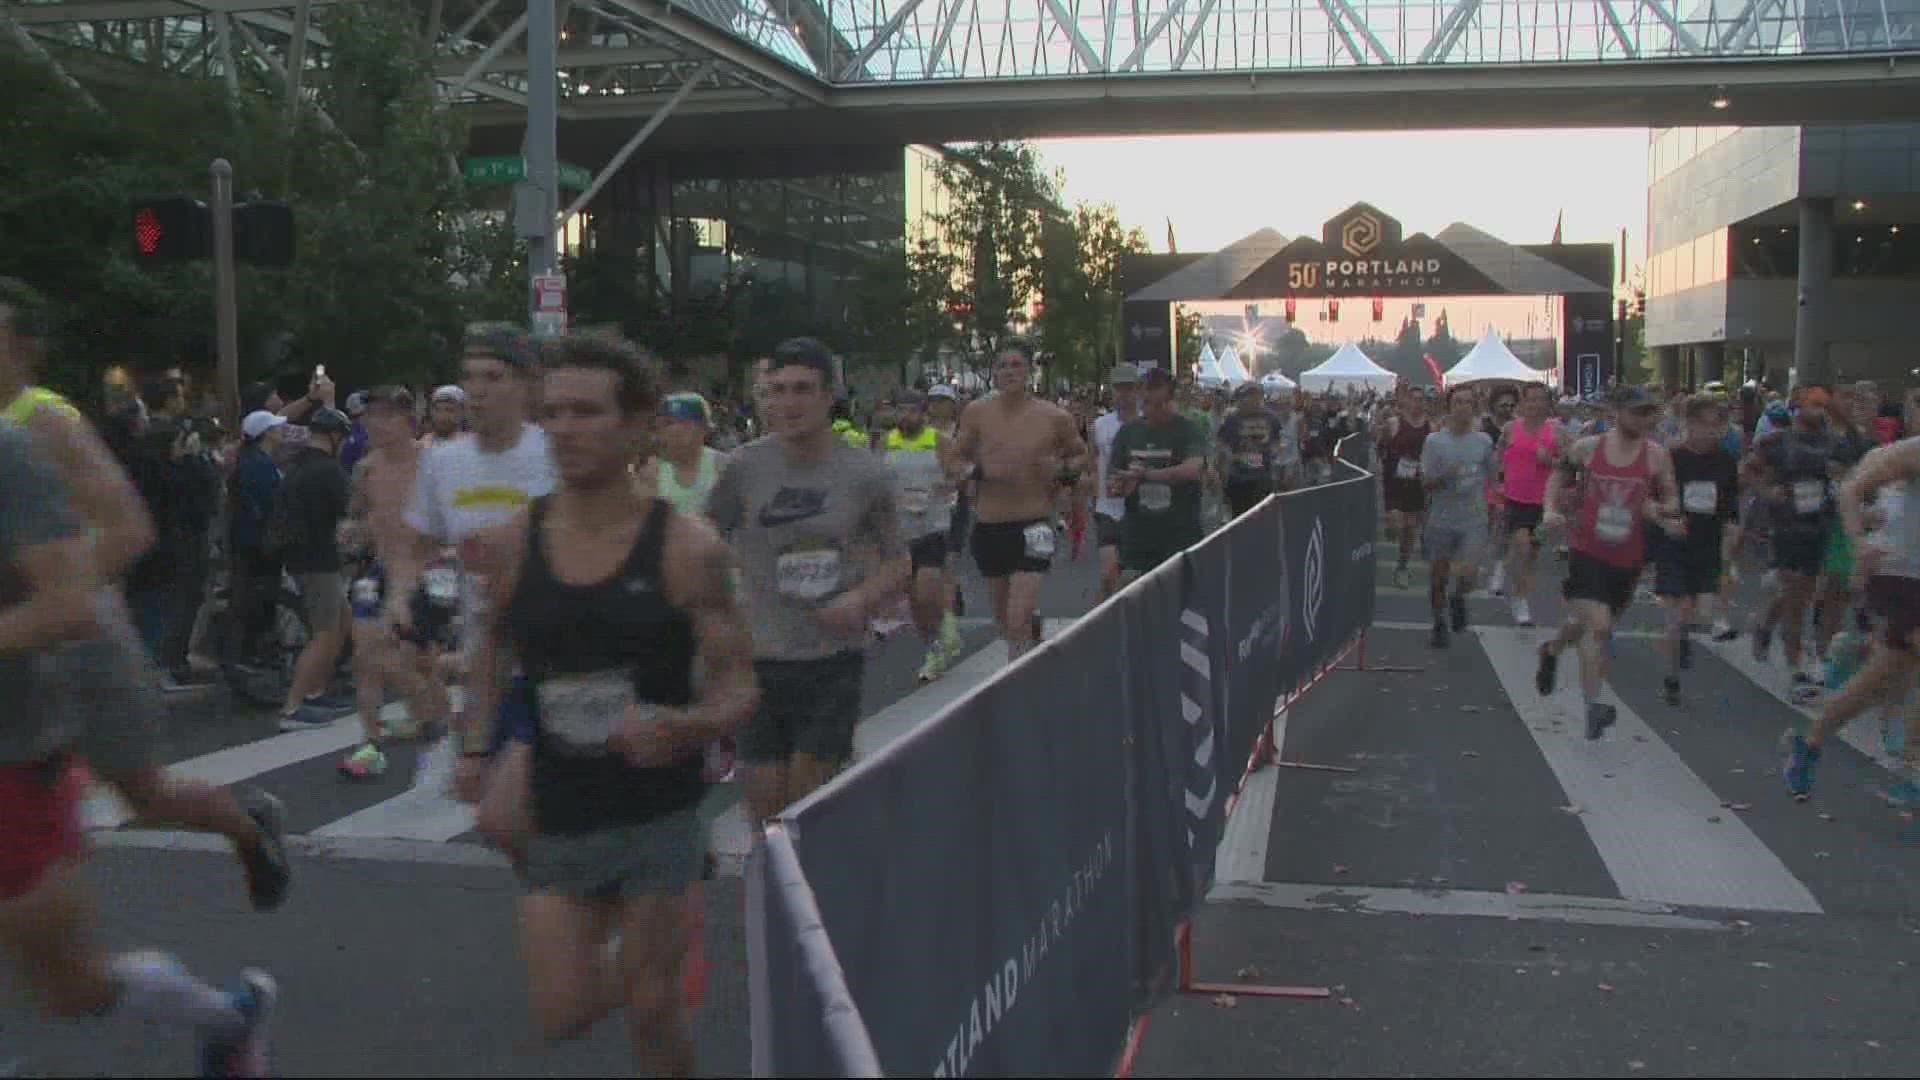 After a cancelled race in 2020 and a smaller crowd in 2021, the Portland Marathon roared back Sunday. About 7,000 runners joined the race.